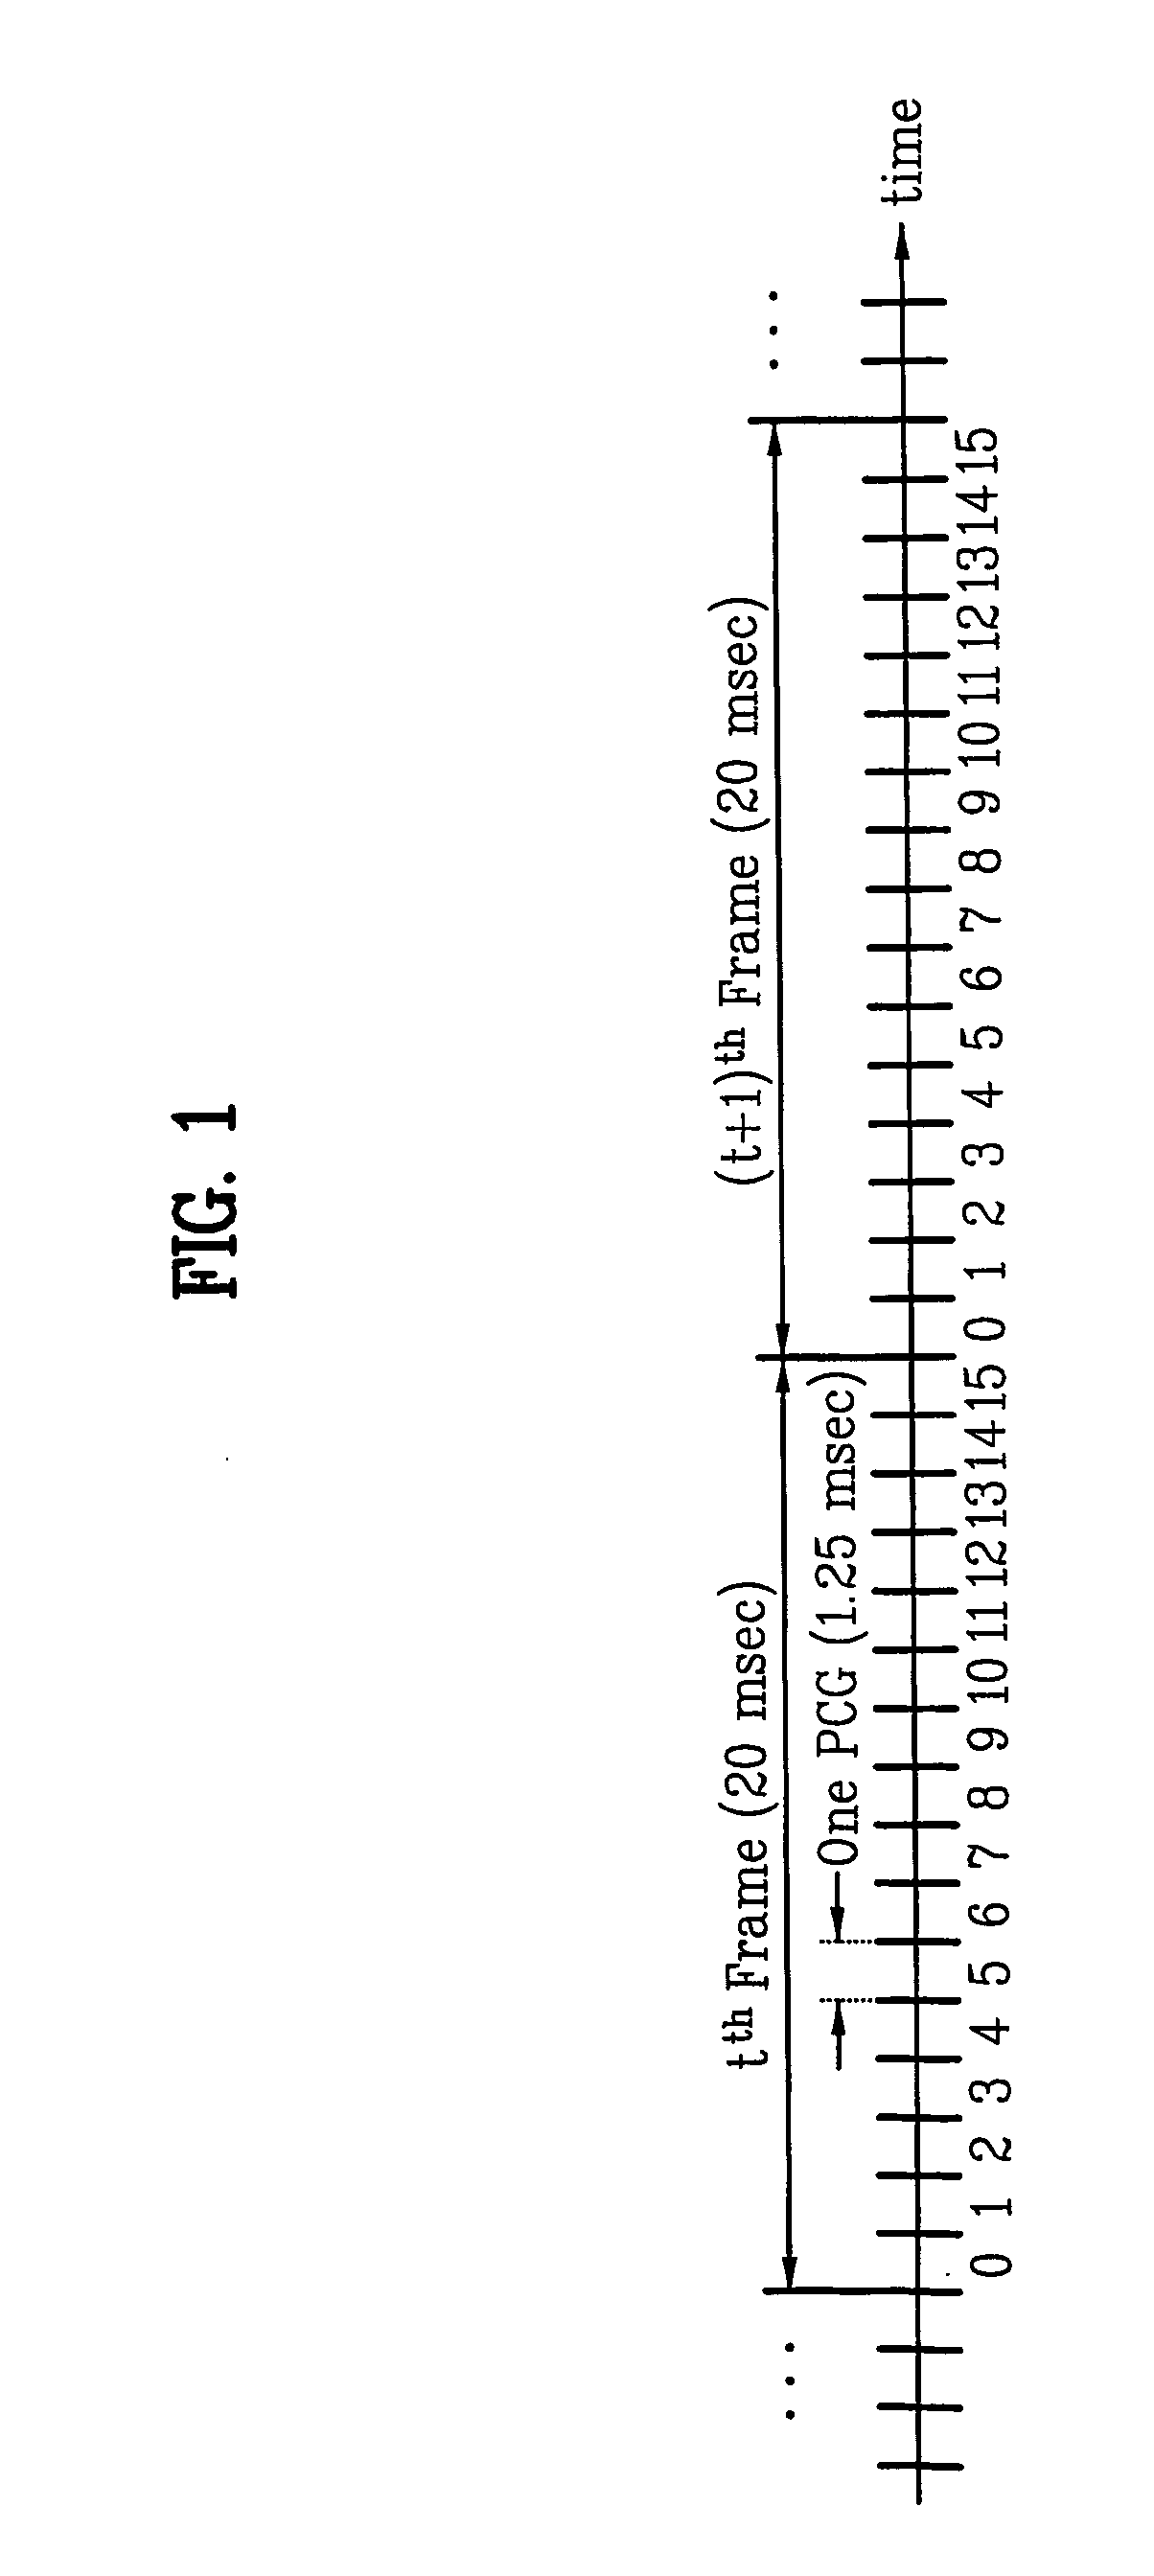 Method for transmitting power control bits and detecting power control rate